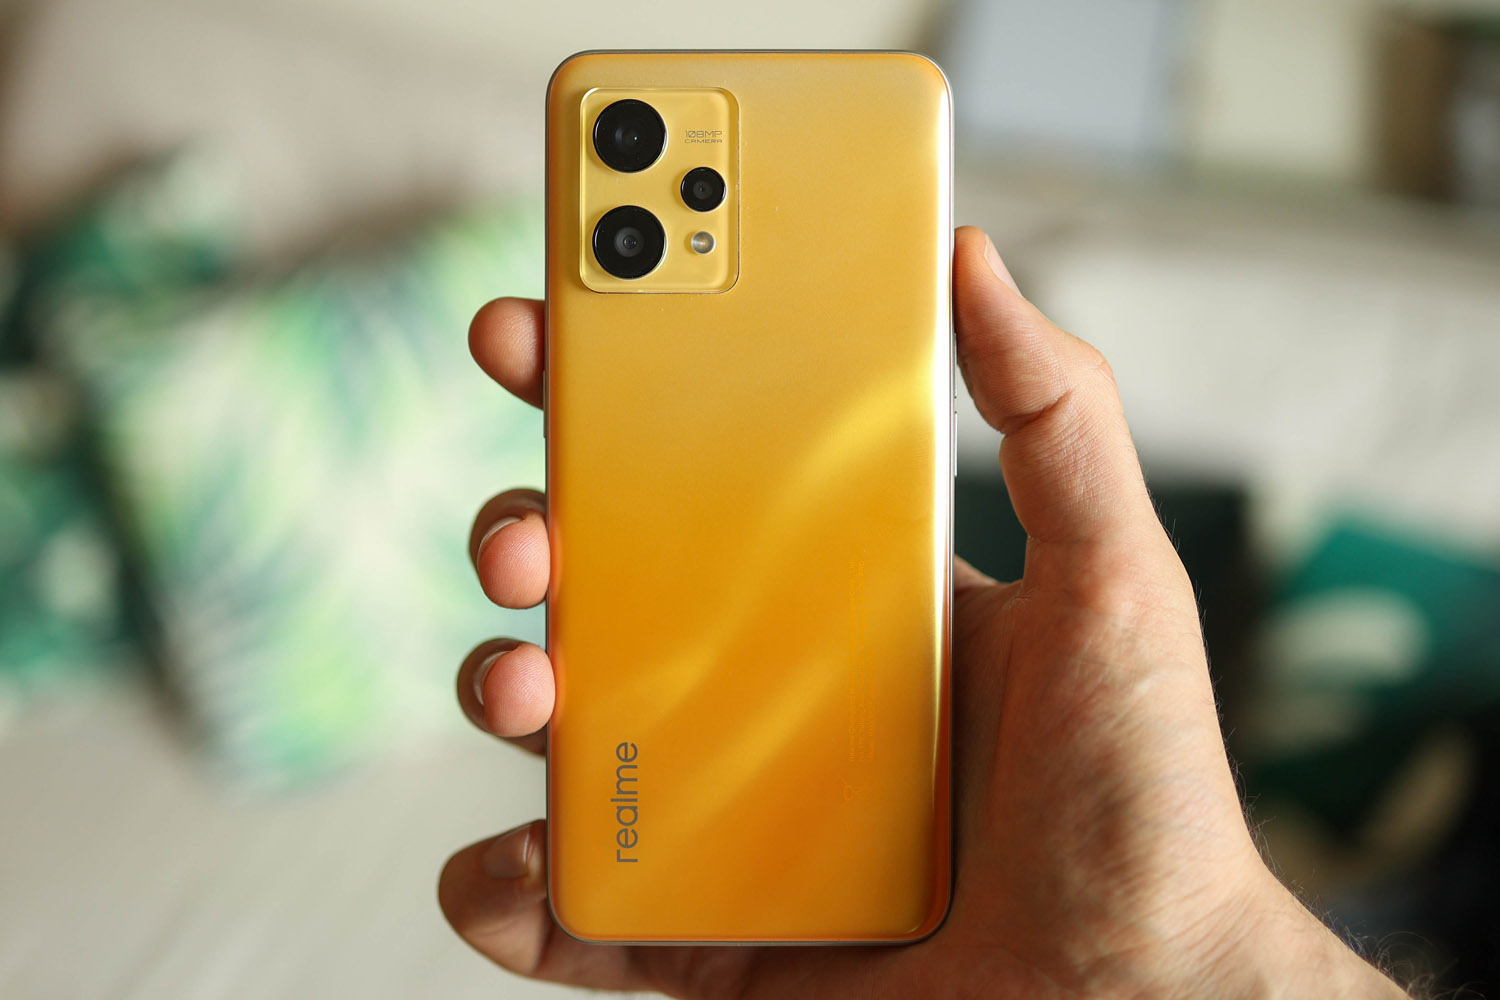 Realme 8 Pro, hands on: Good features at an affordable price, but no 5G